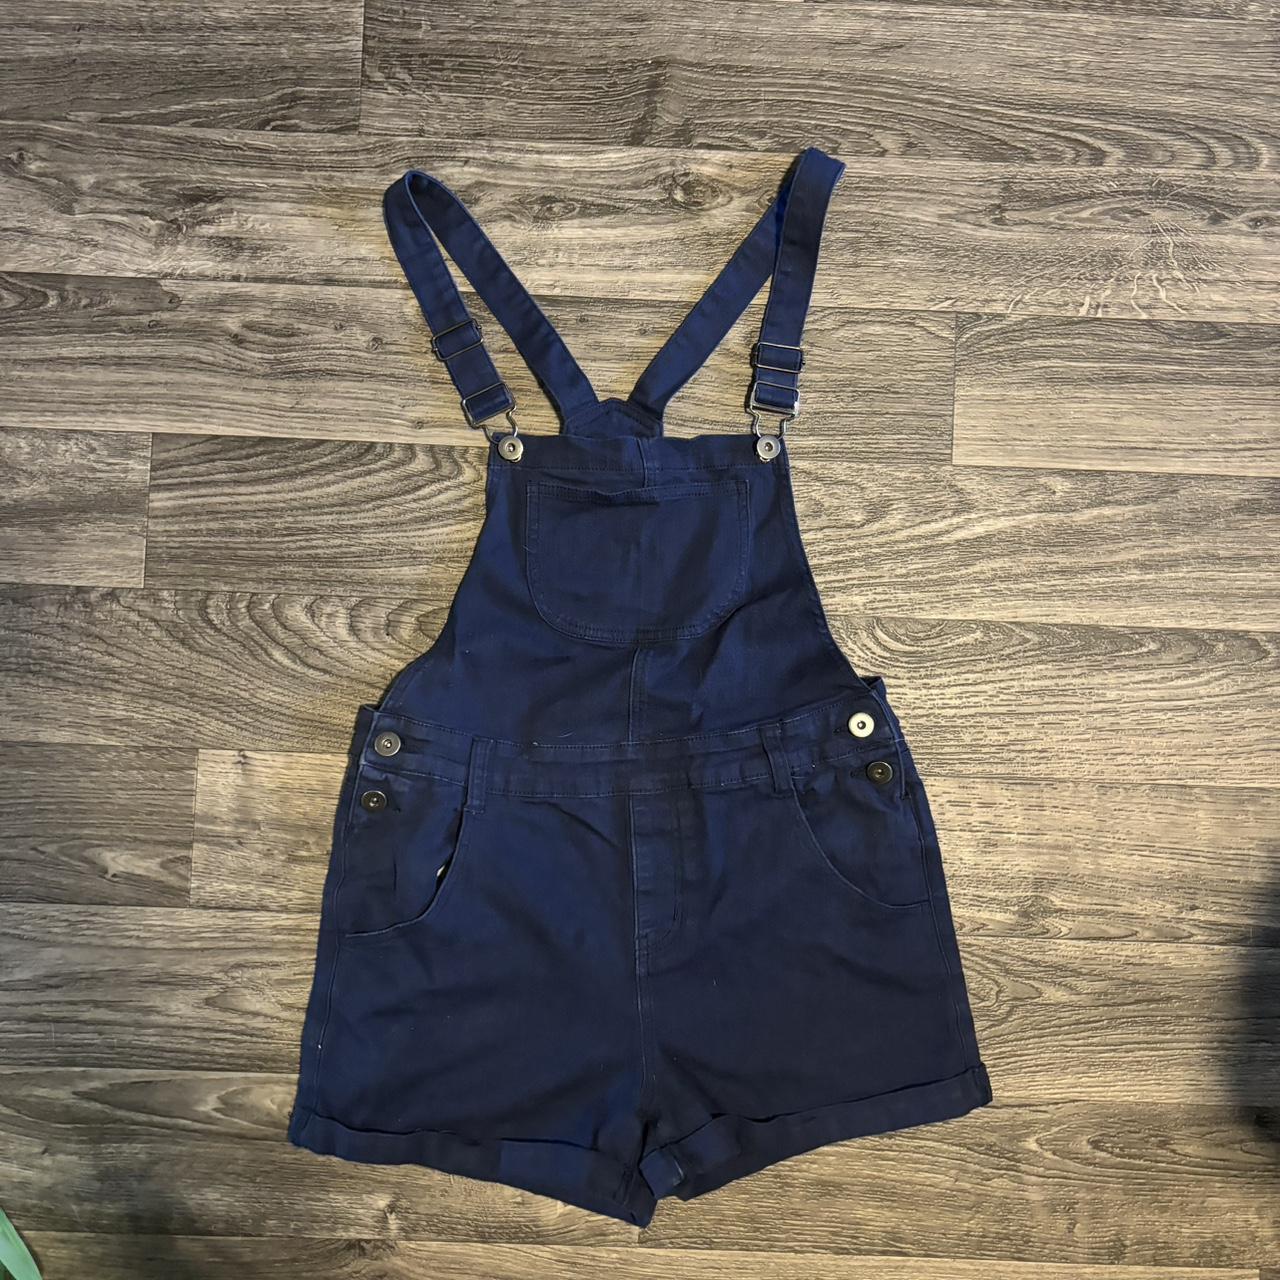 Vintage Navy Blue Overalls 🫐 - No PayPal payments! 🐛... - Depop